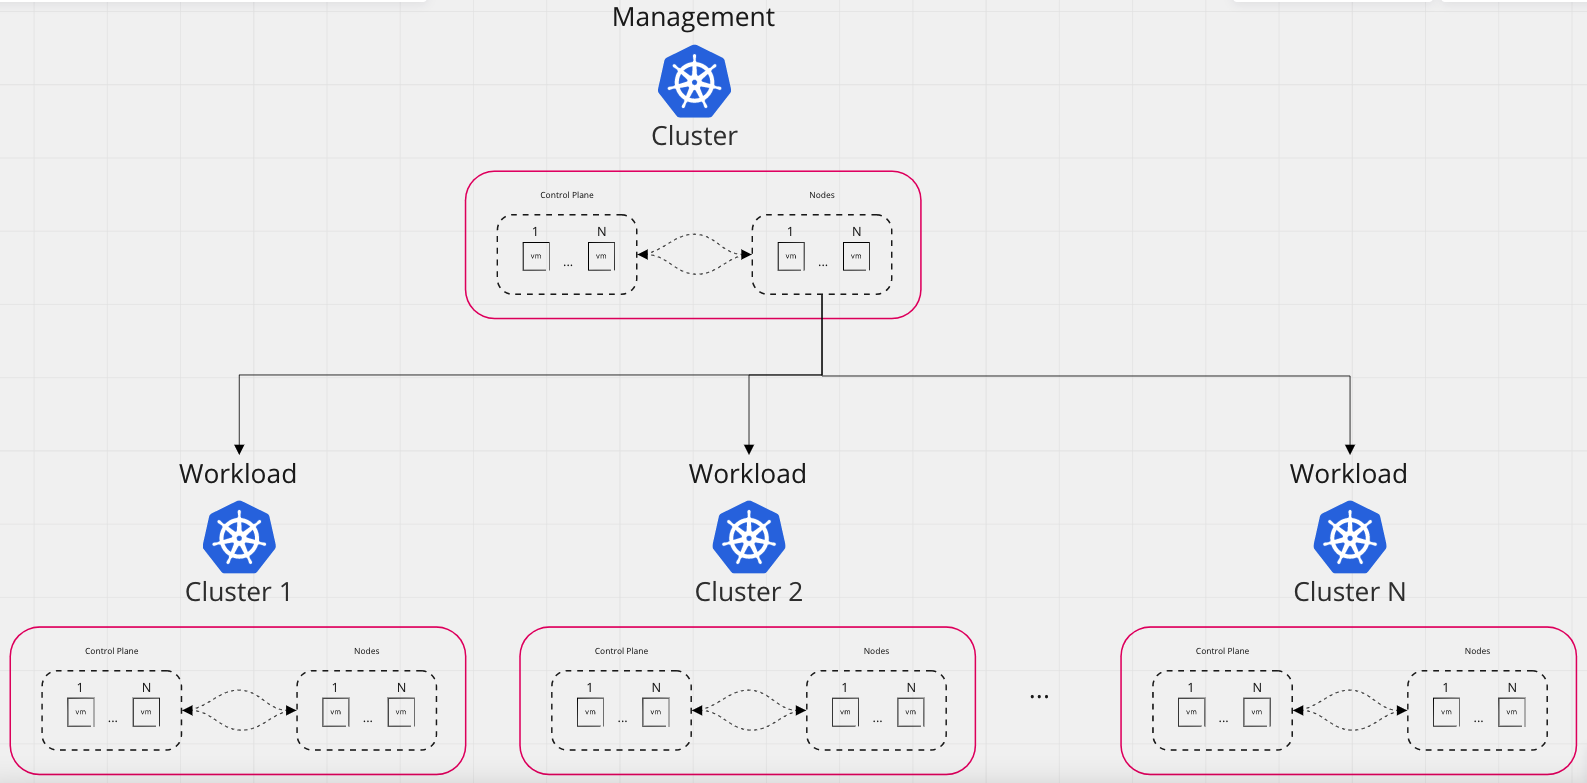 &ldquo;Managed cluster control planes with workloads&rdquo;